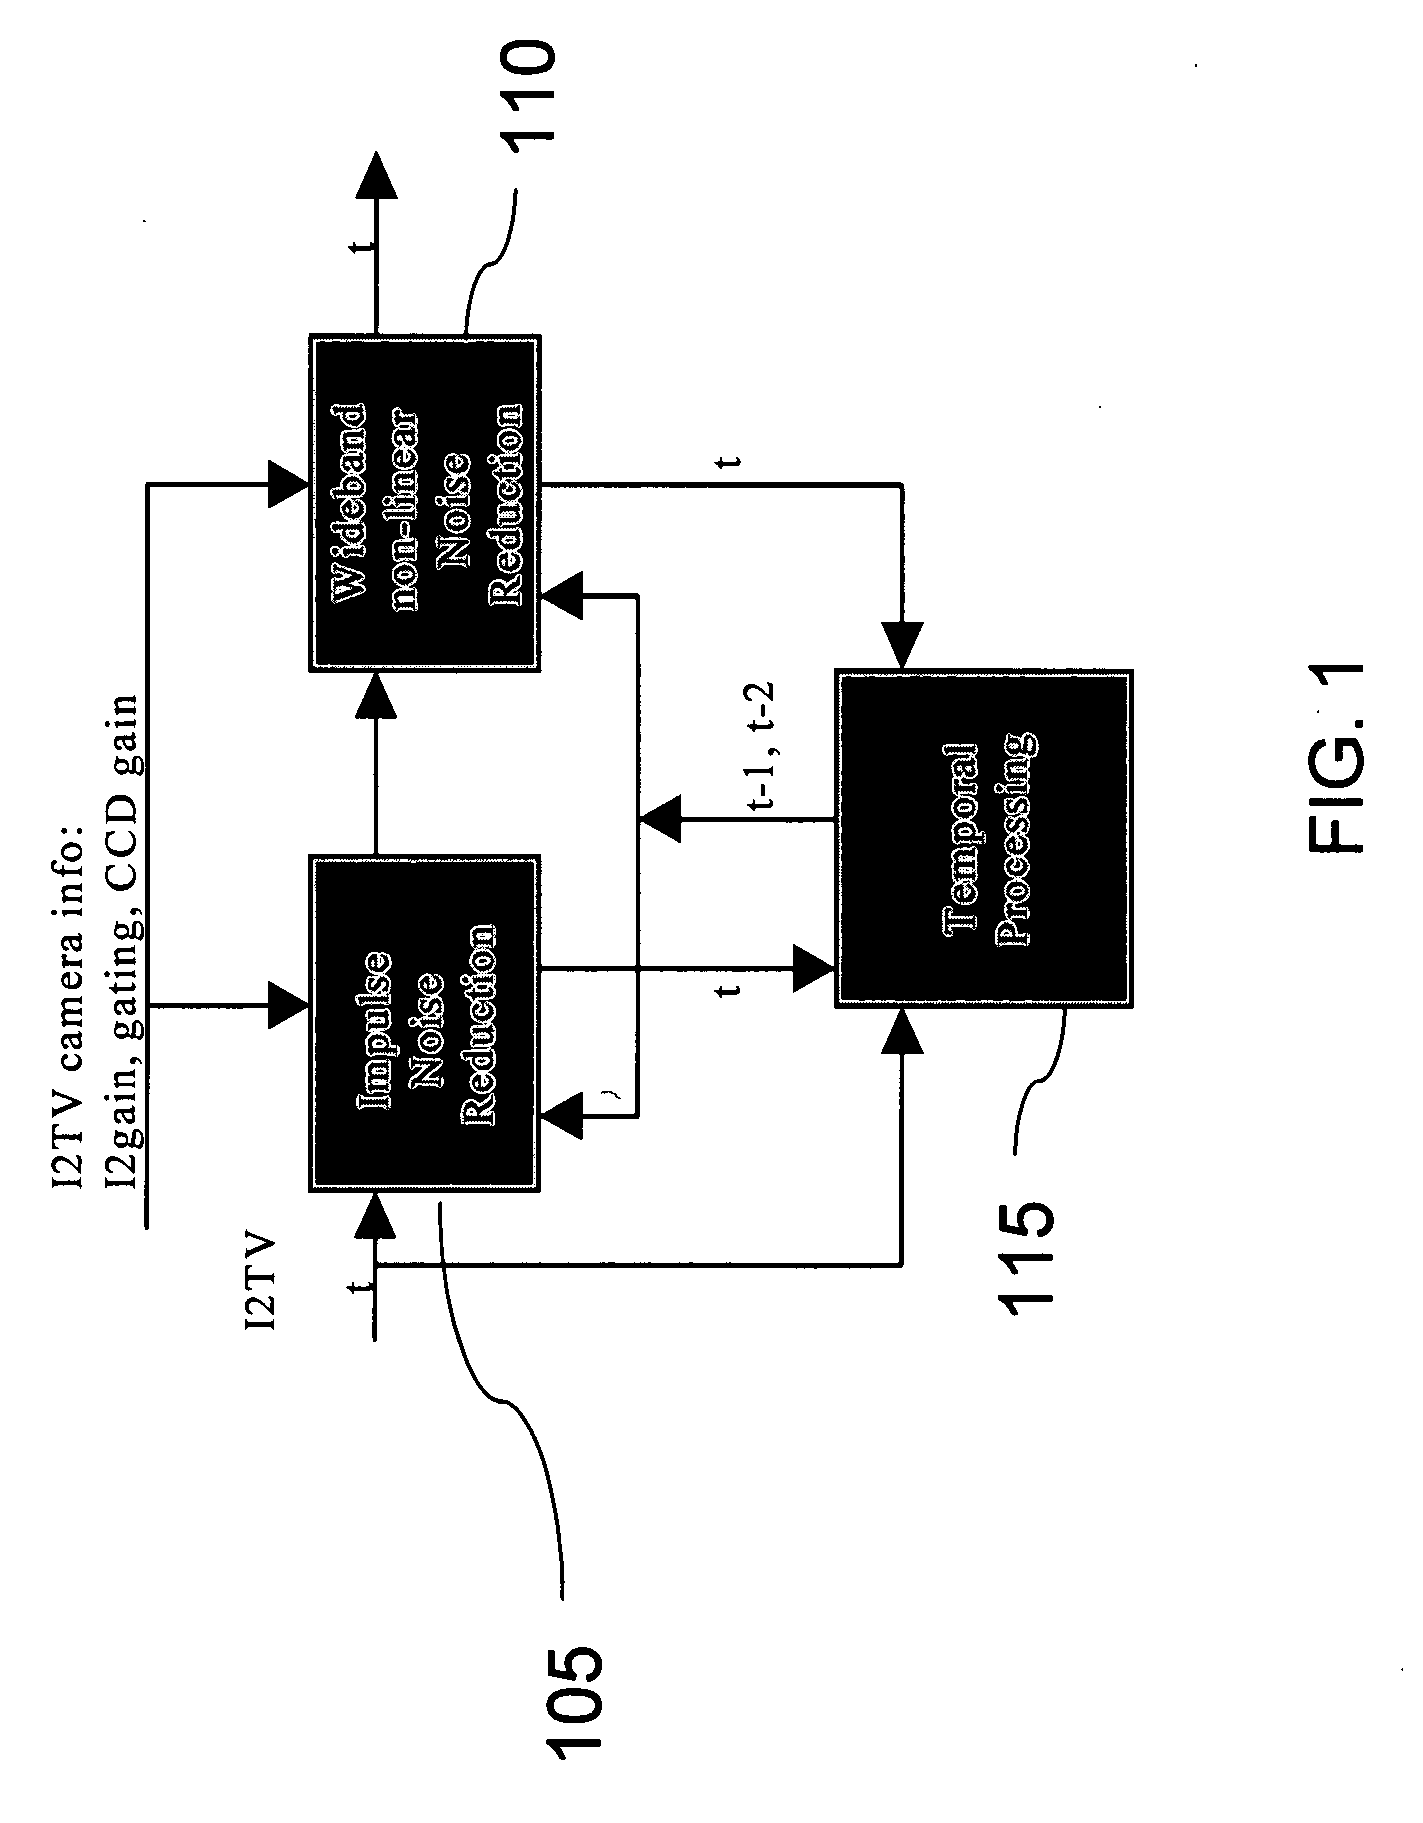 Method and apparatus for providing noise reduction